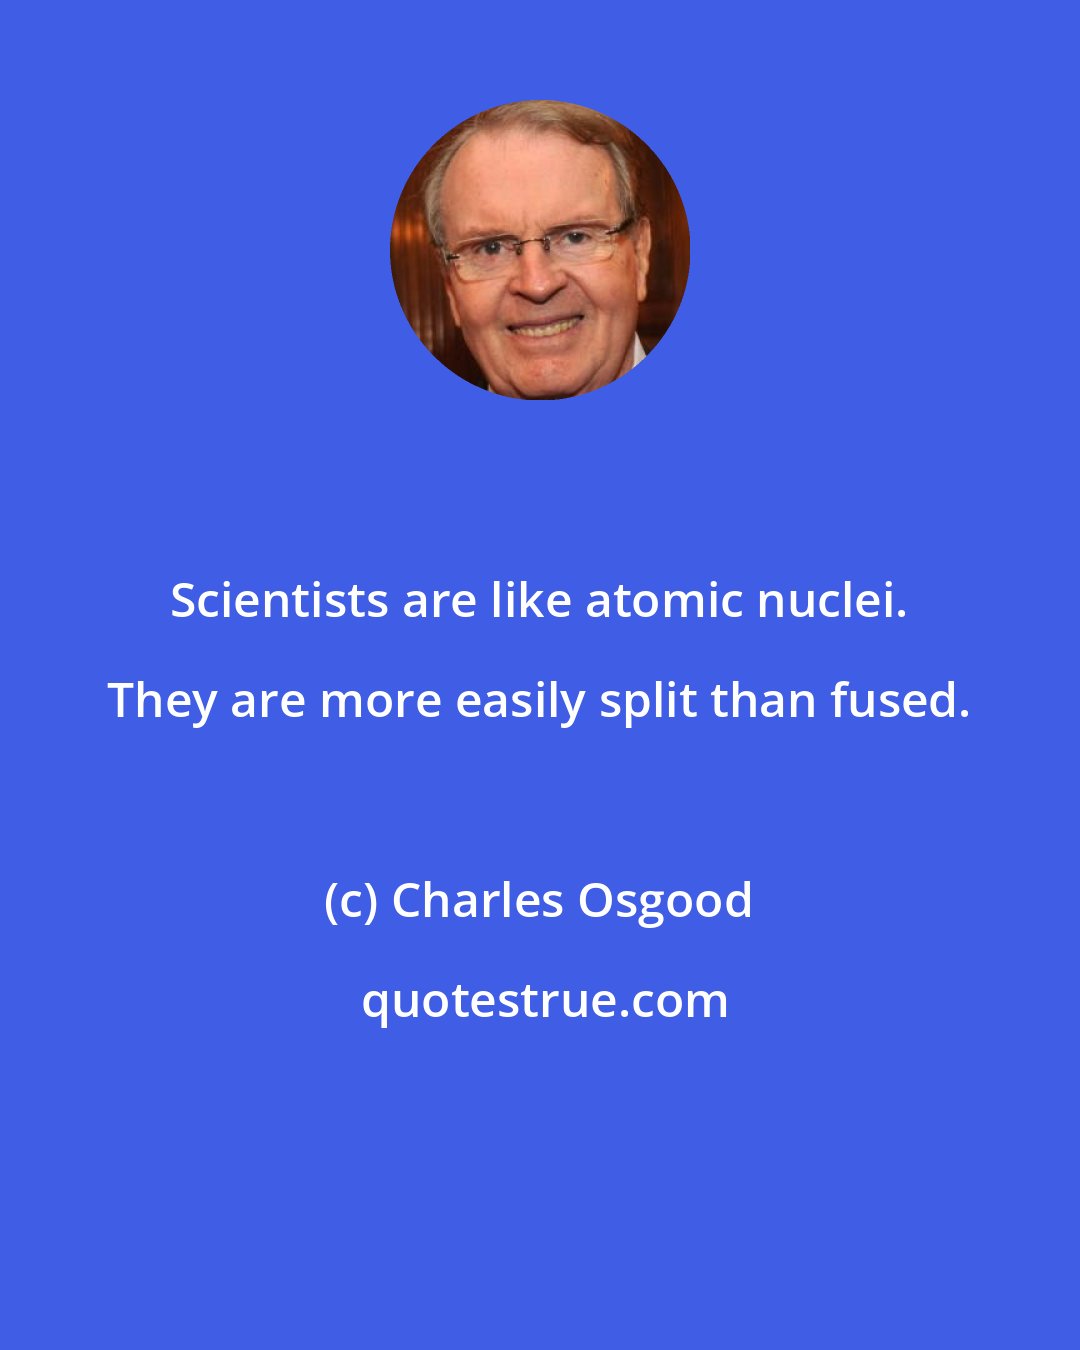 Charles Osgood: Scientists are like atomic nuclei. They are more easily split than fused.